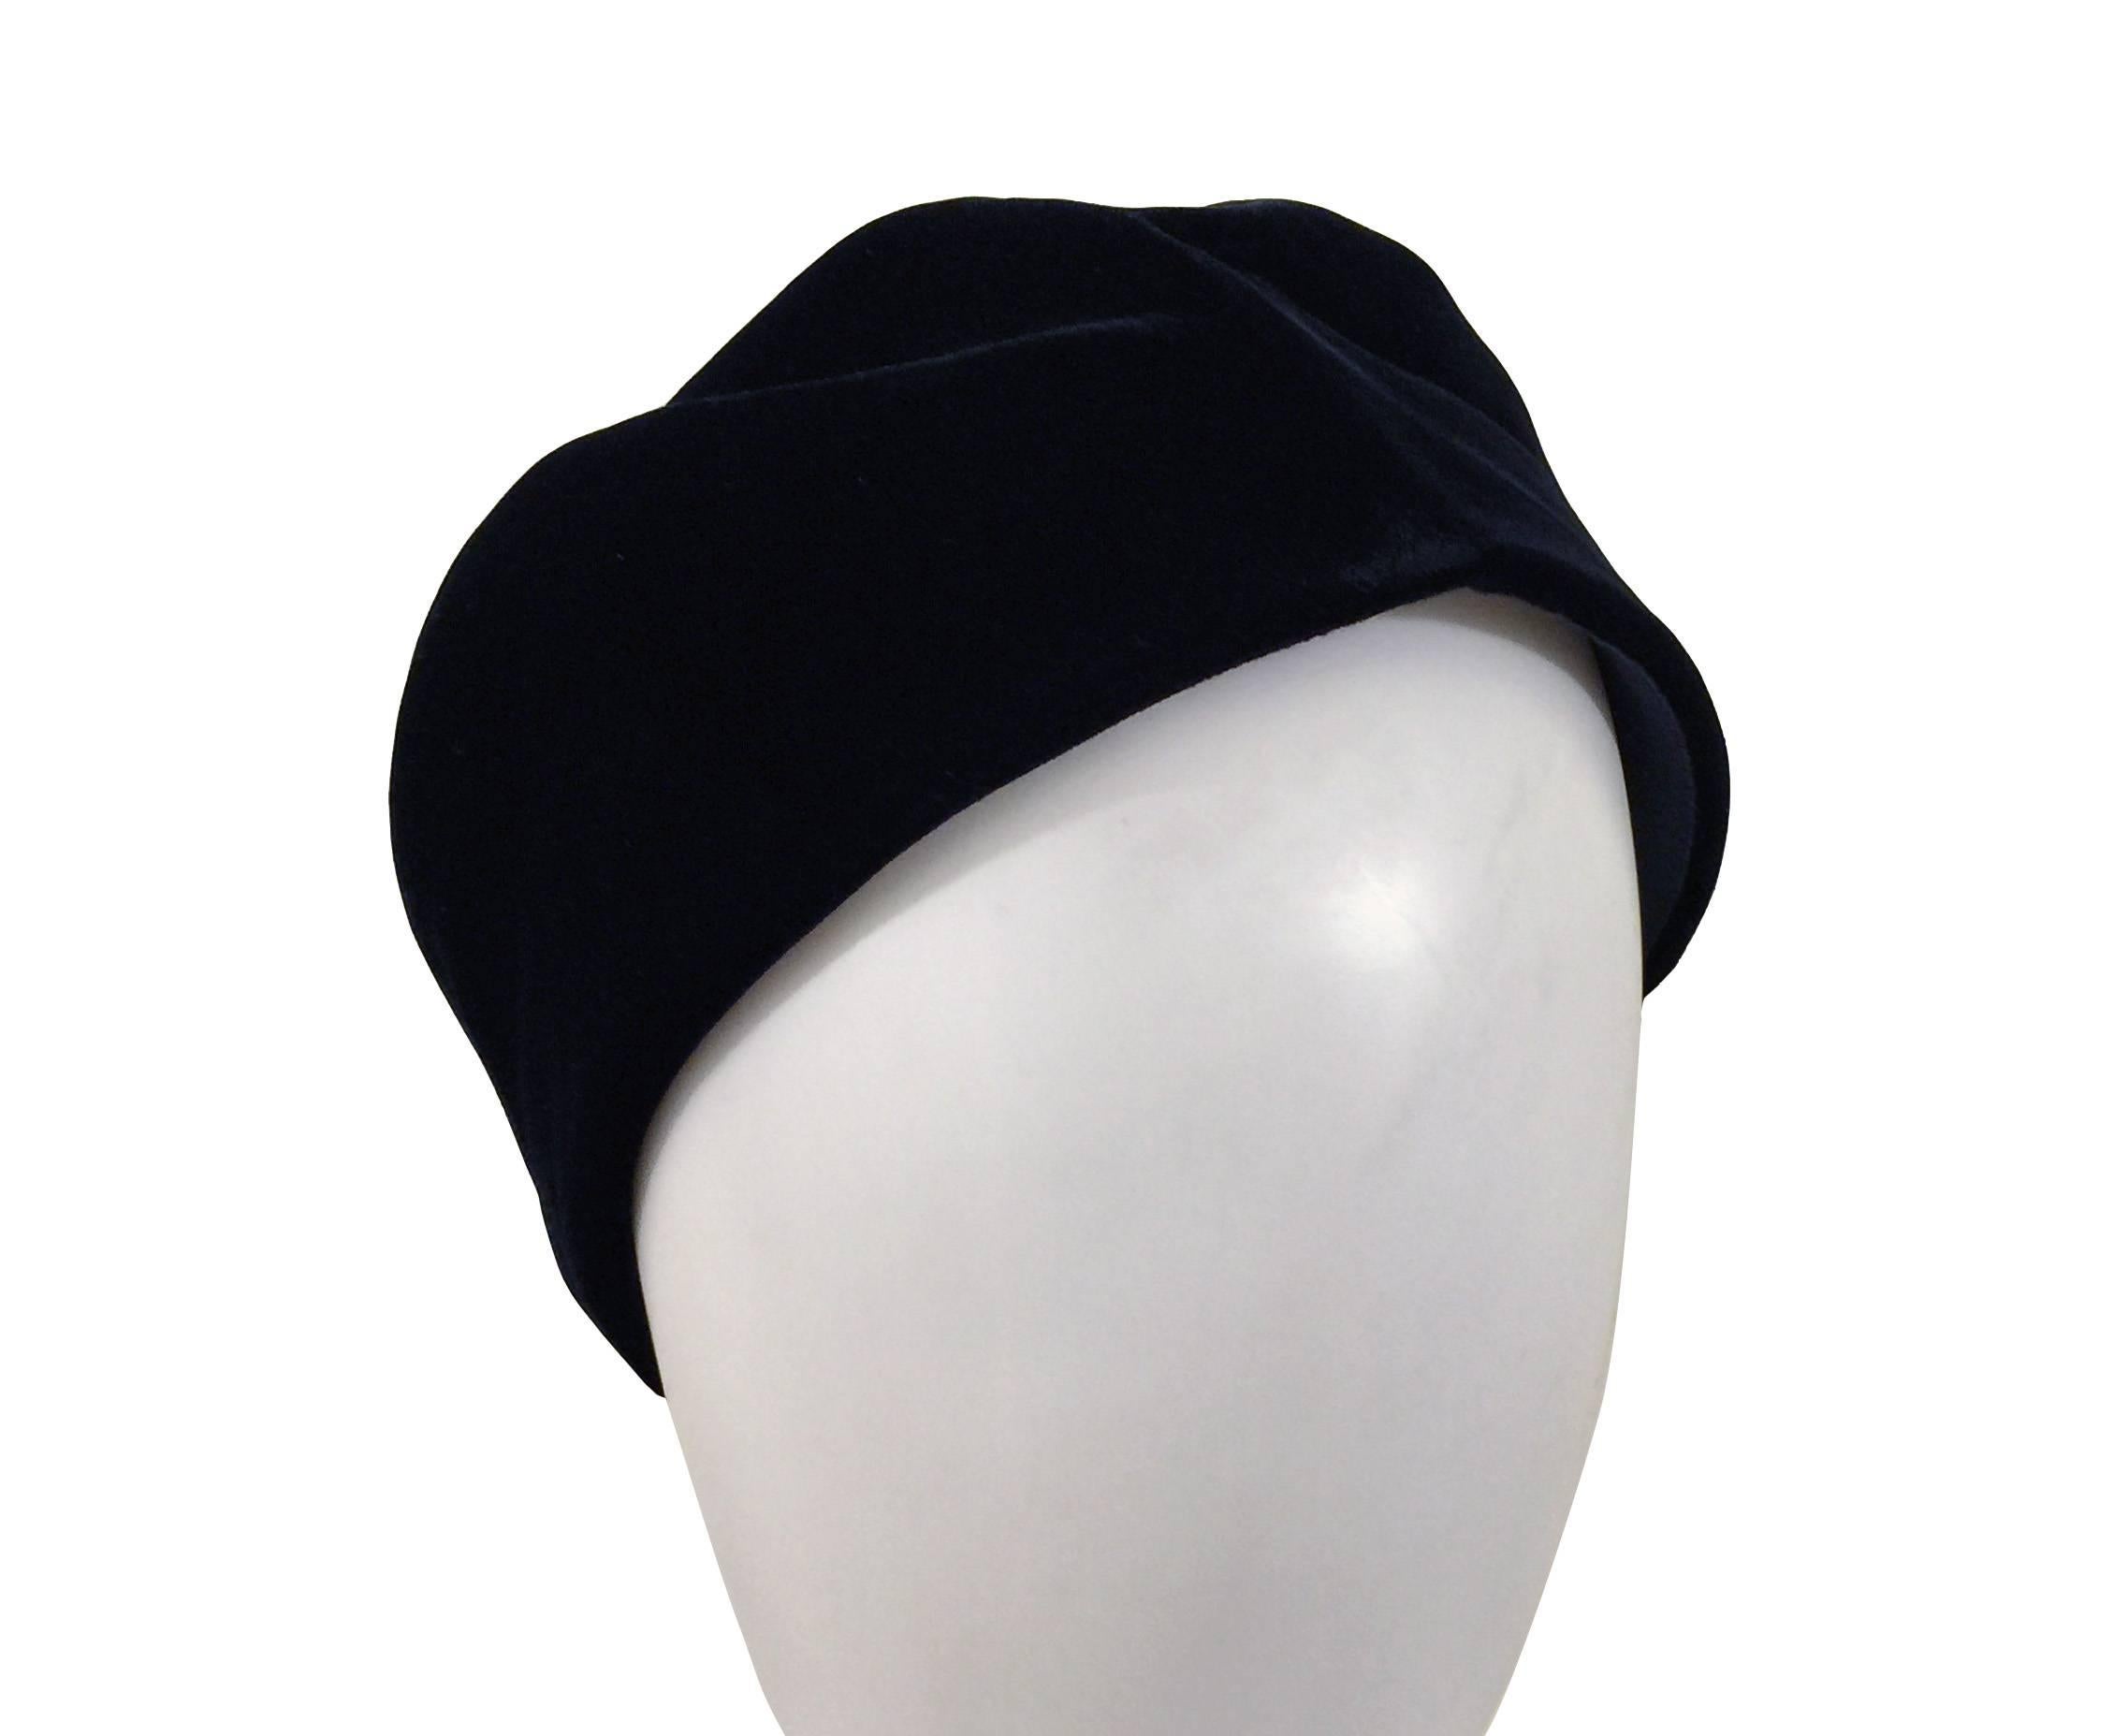 Giorgio Armani Ladies Vintage Beret.  Stylishly Chic Jet Black Velvet Beret.  Very Good Condition.  Size 57.  Material Silk Velvet; Color Black.  Made in Italy.  Grosgrain Band Interior.  Silk Lined.  Armani 1993.  RRP £680.